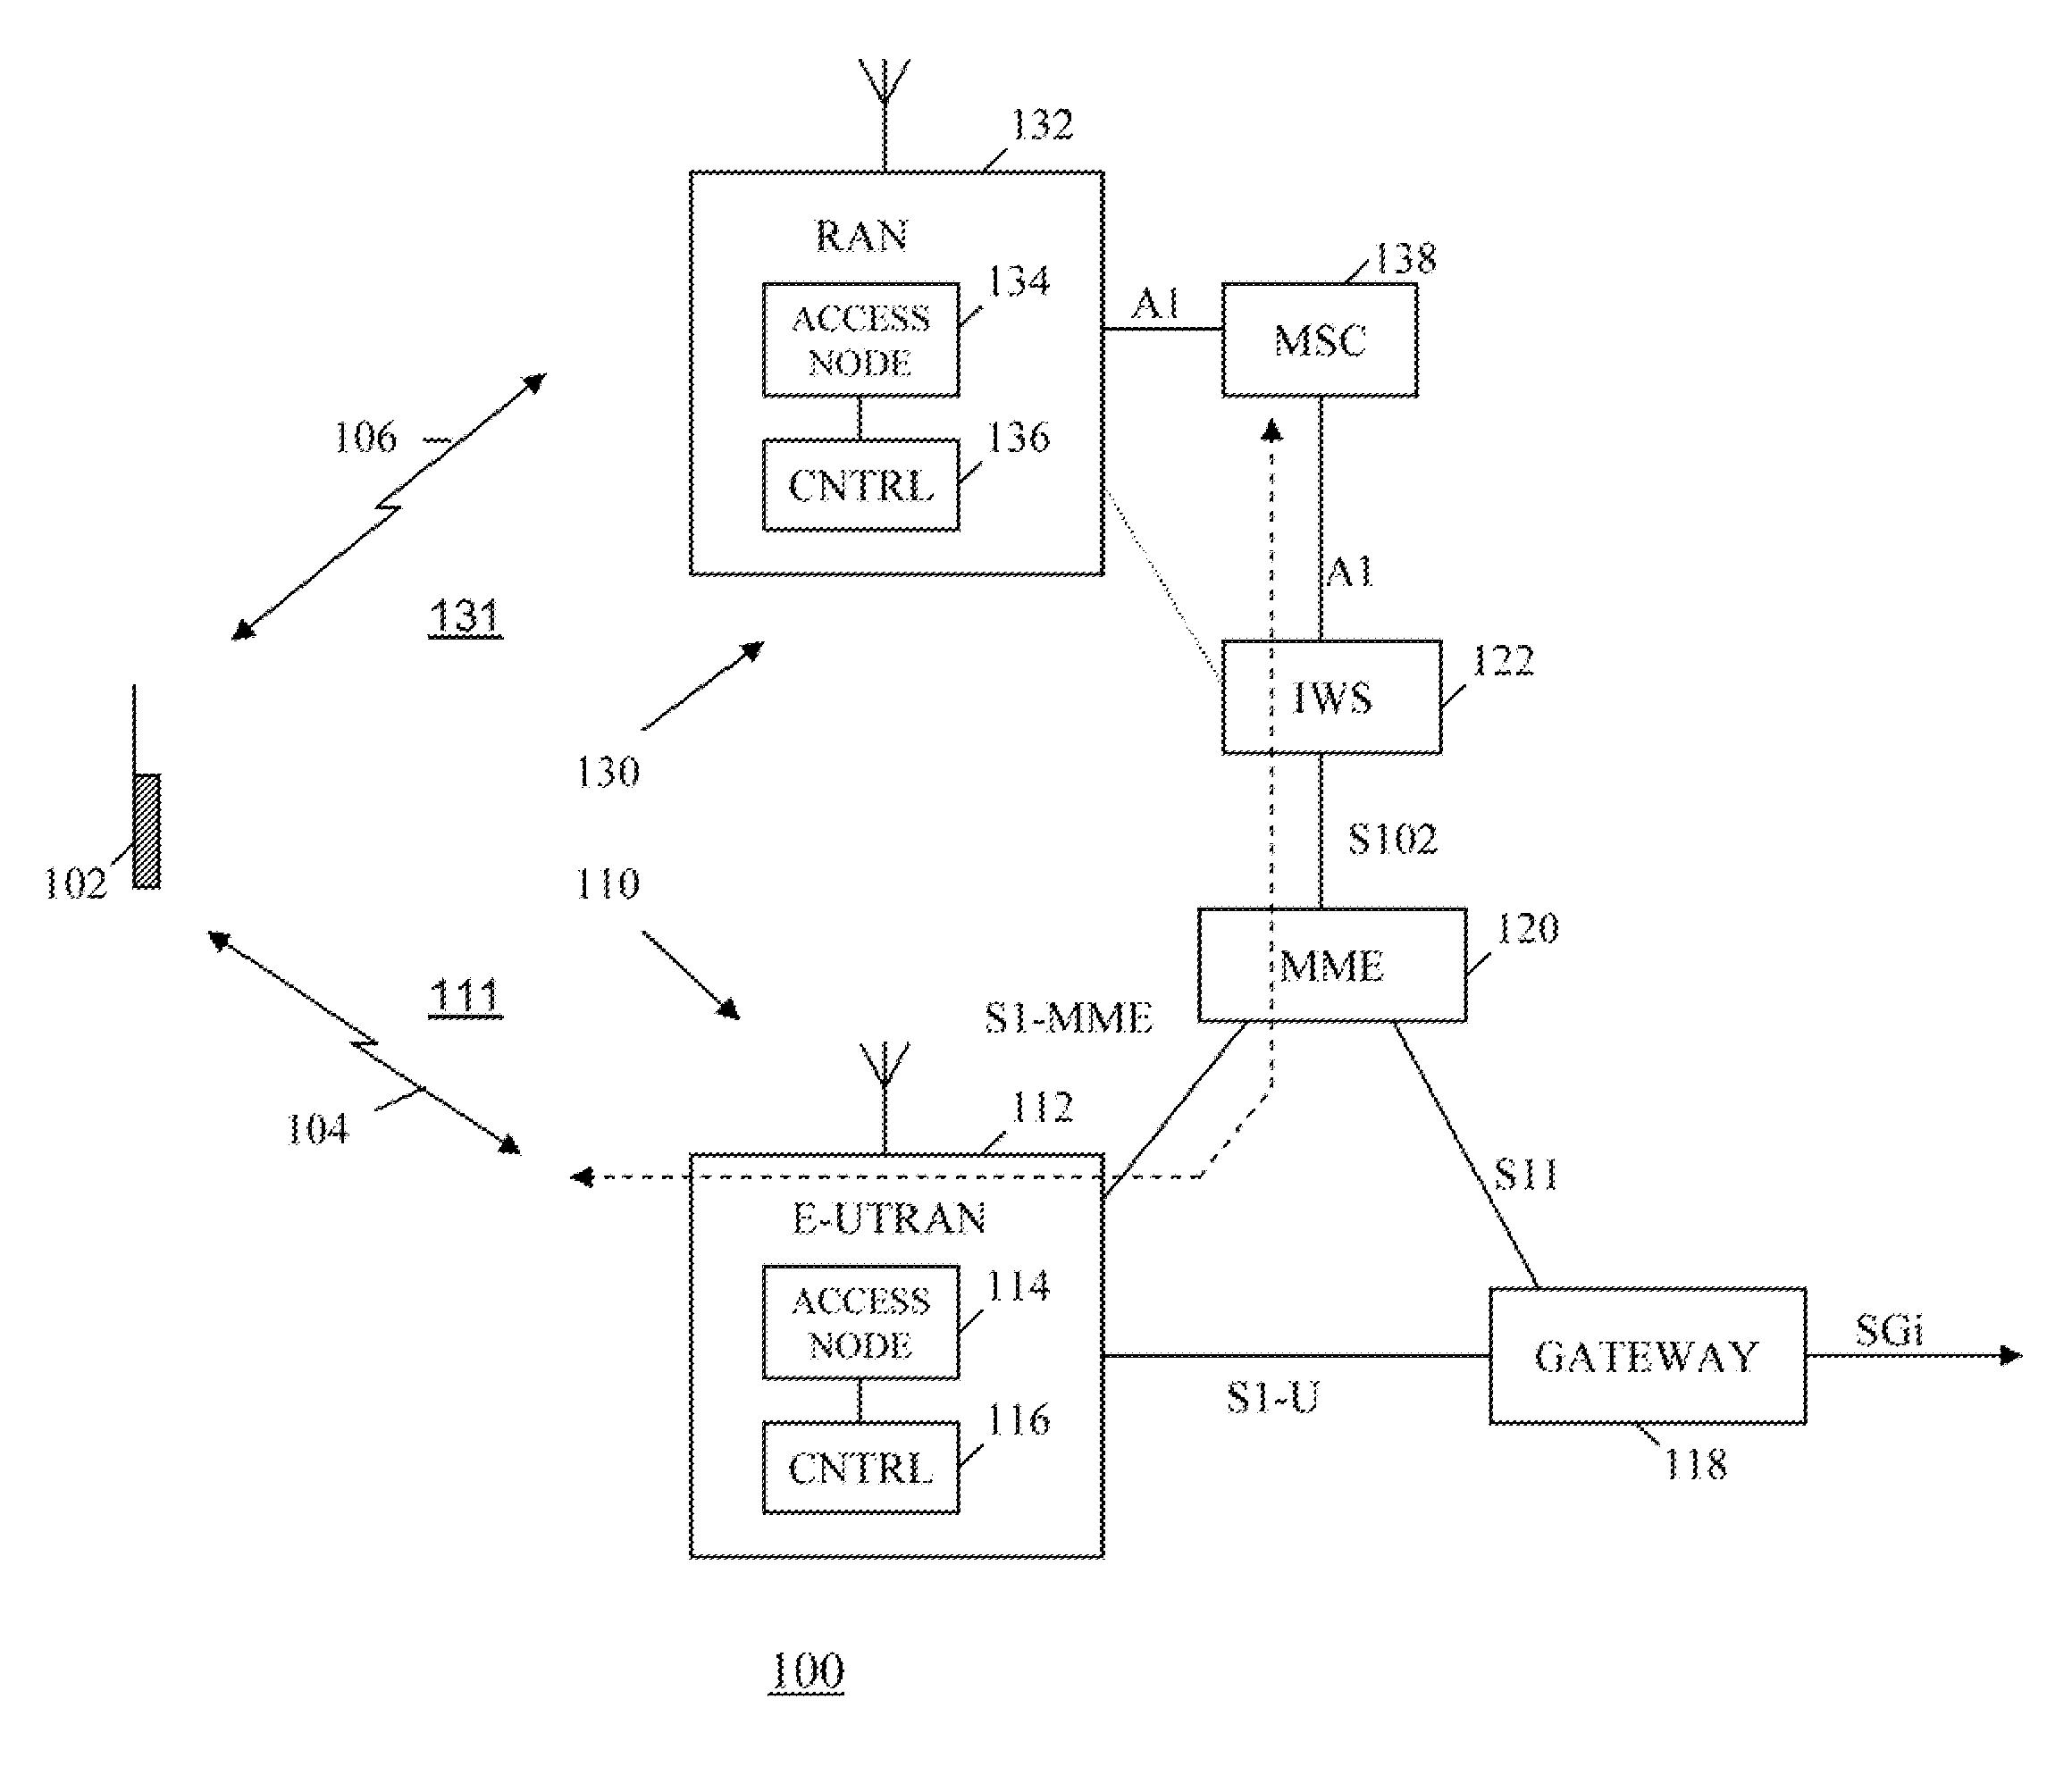 Method and apparatus for controlling network access in a multi-technology wireless communication system